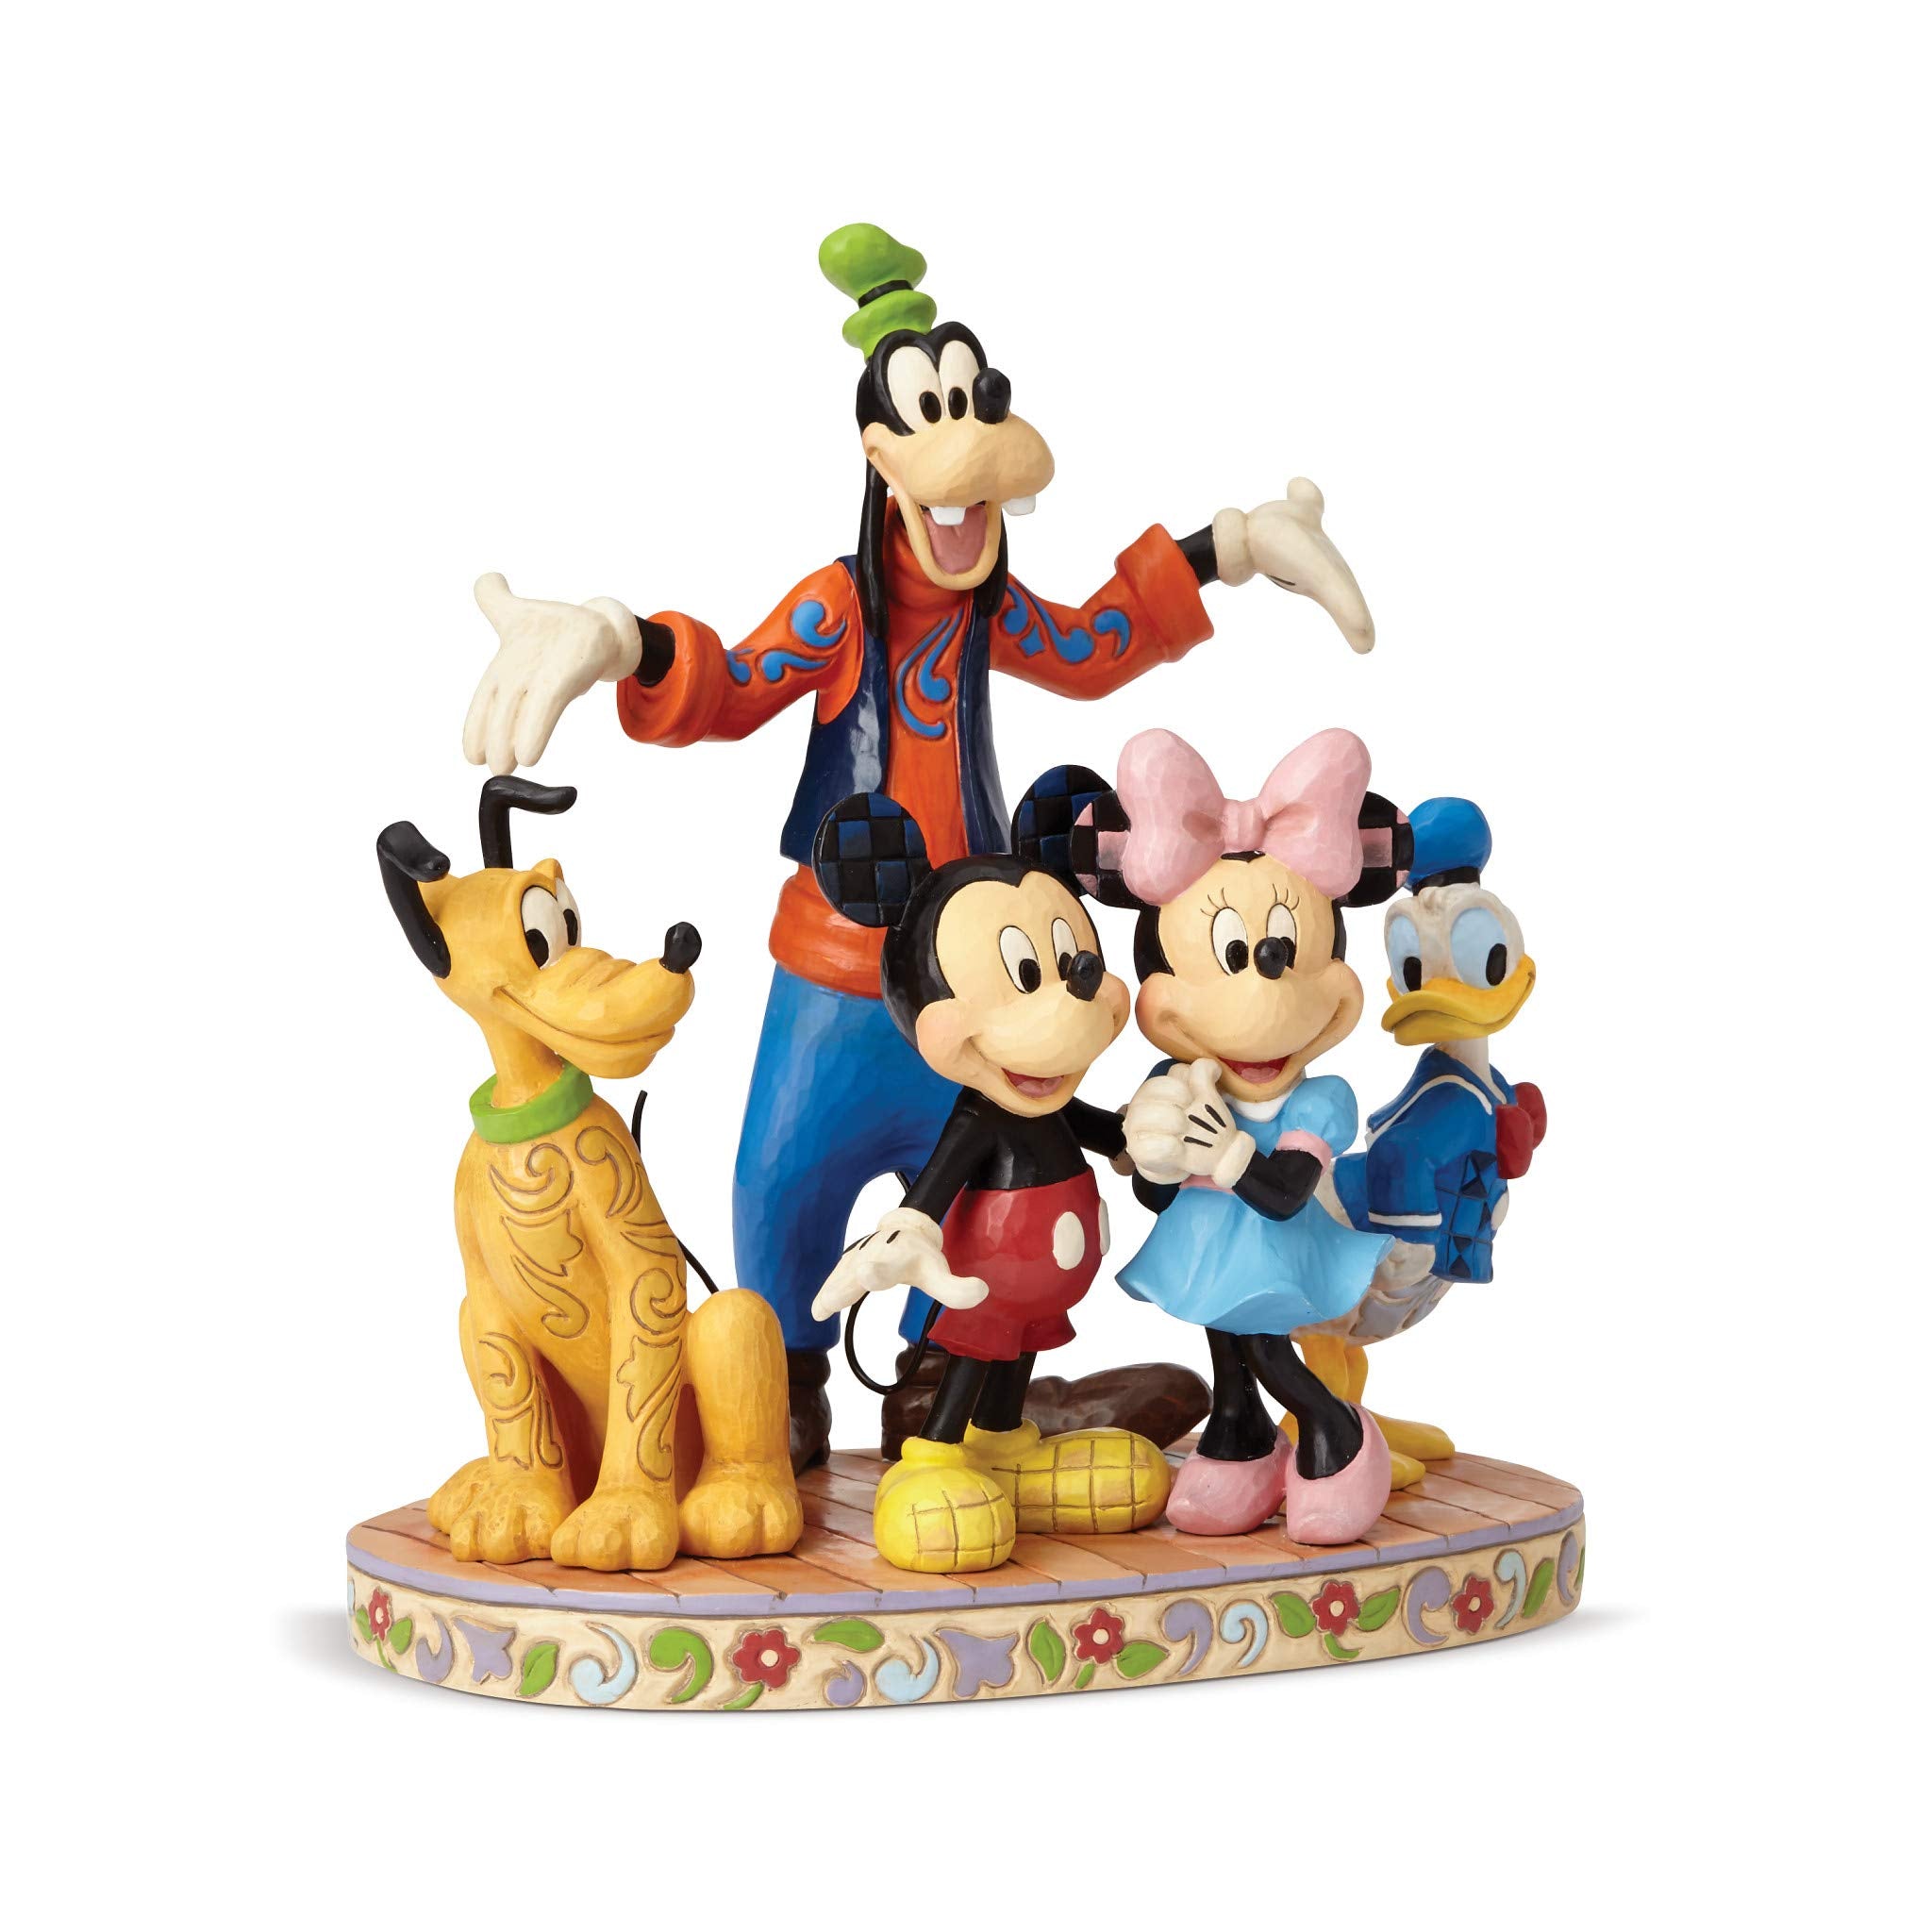 Enesco Disney Traditions by Jim Shore Fab Five The Gangs All Here Figurine, 8.750, Multi-Colored